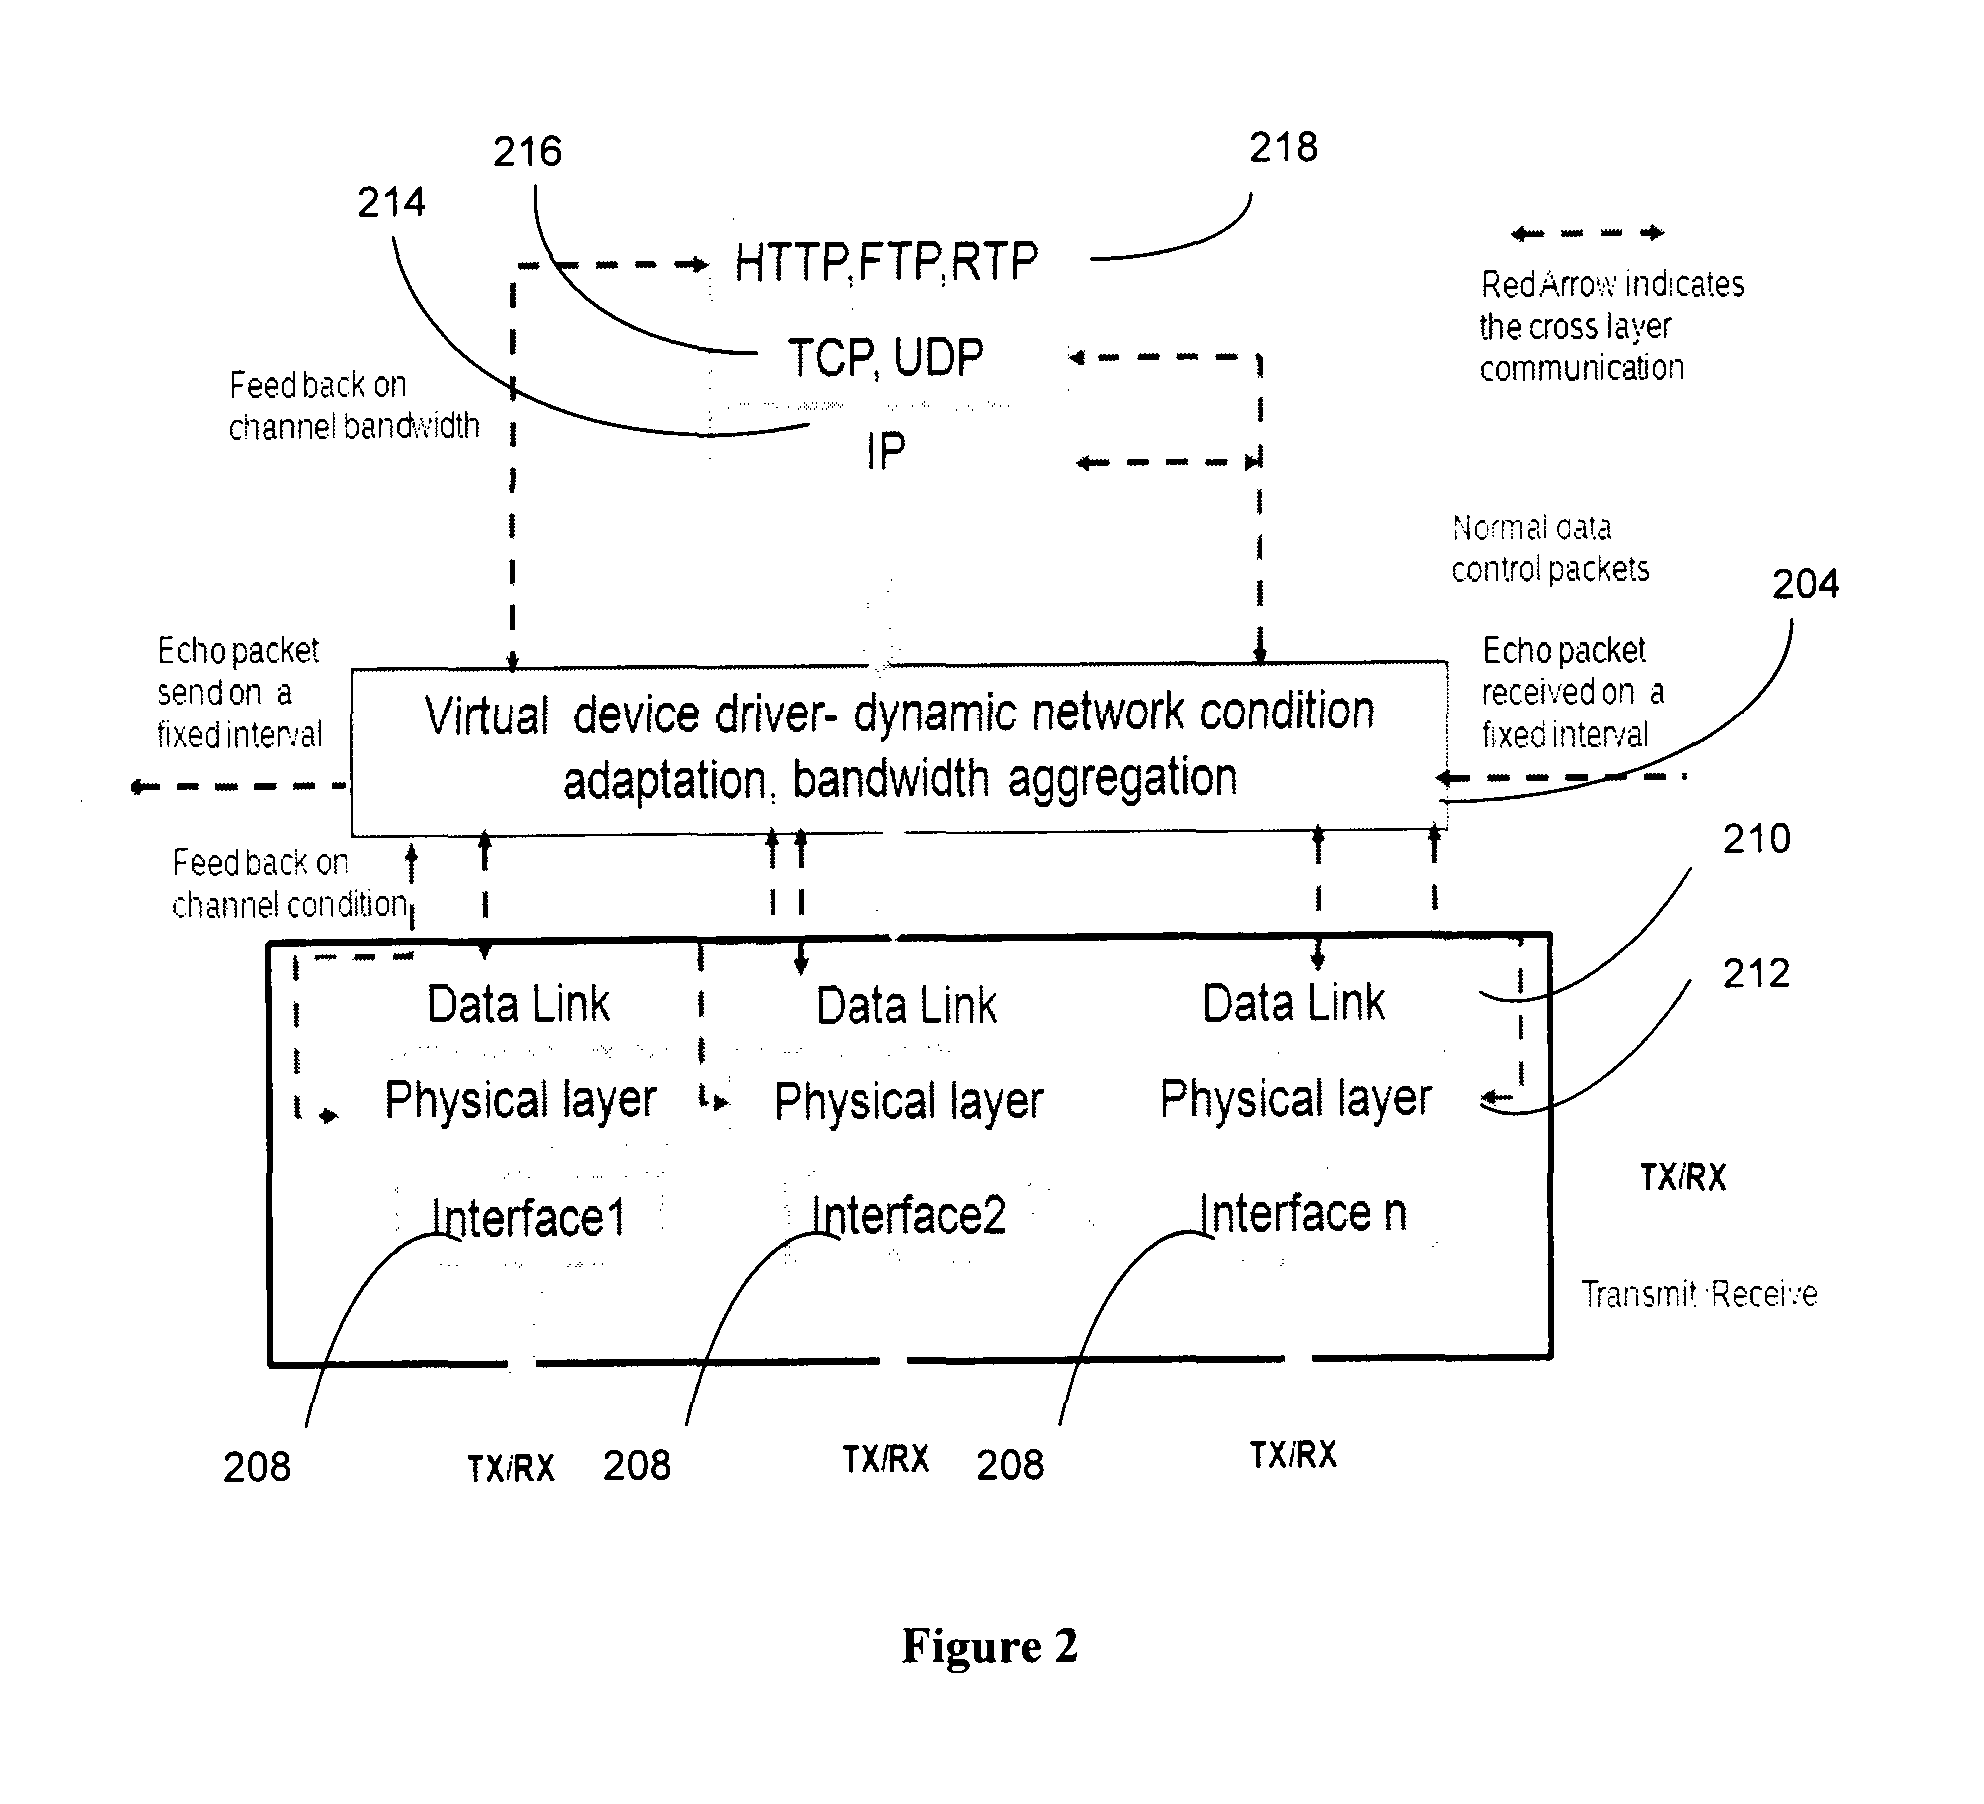 System and Method for Aggregating and Estimating the Bandwidth of Multiple Network Interfaces